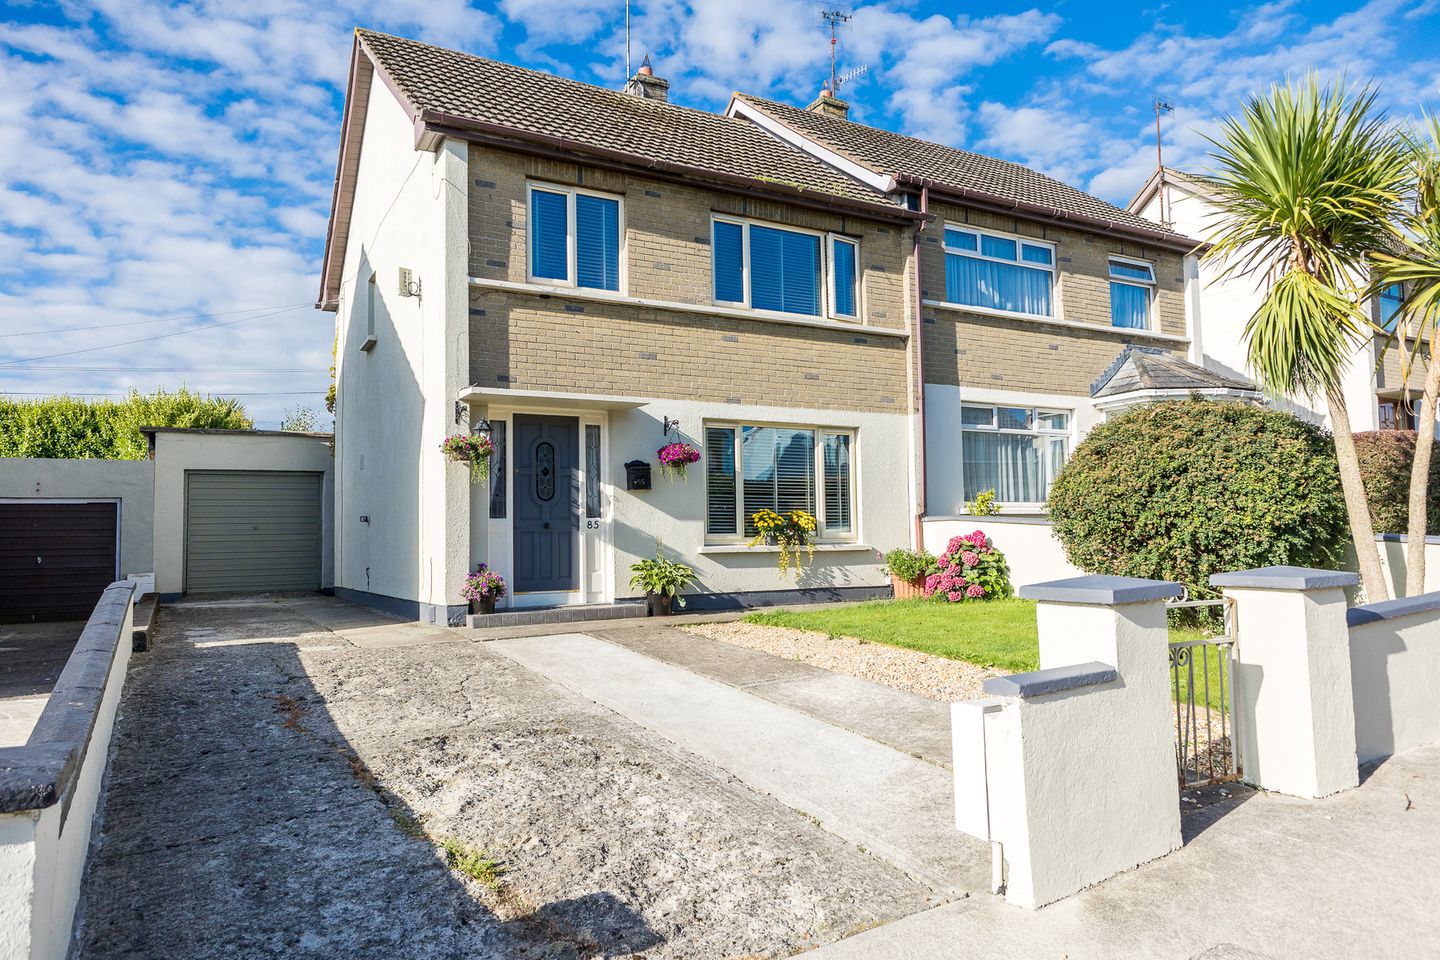 85 Brookville, Drogheda, Co. Louth, A92C5CY